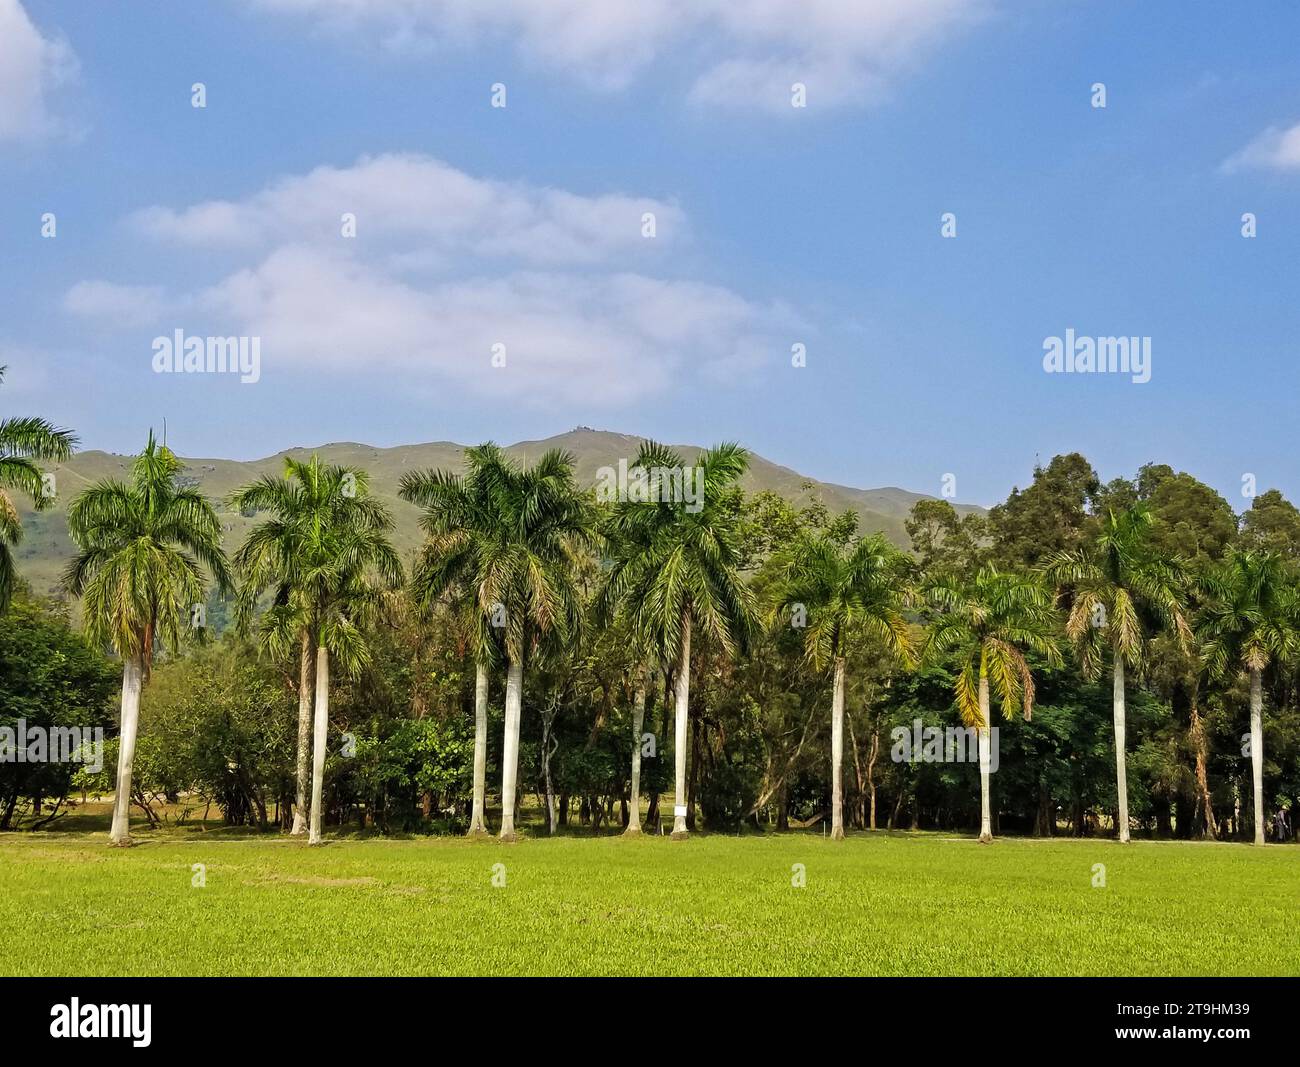 A group of palm trees in front of a mountain under a blue sky in Hong Kong -12 Stock Photo